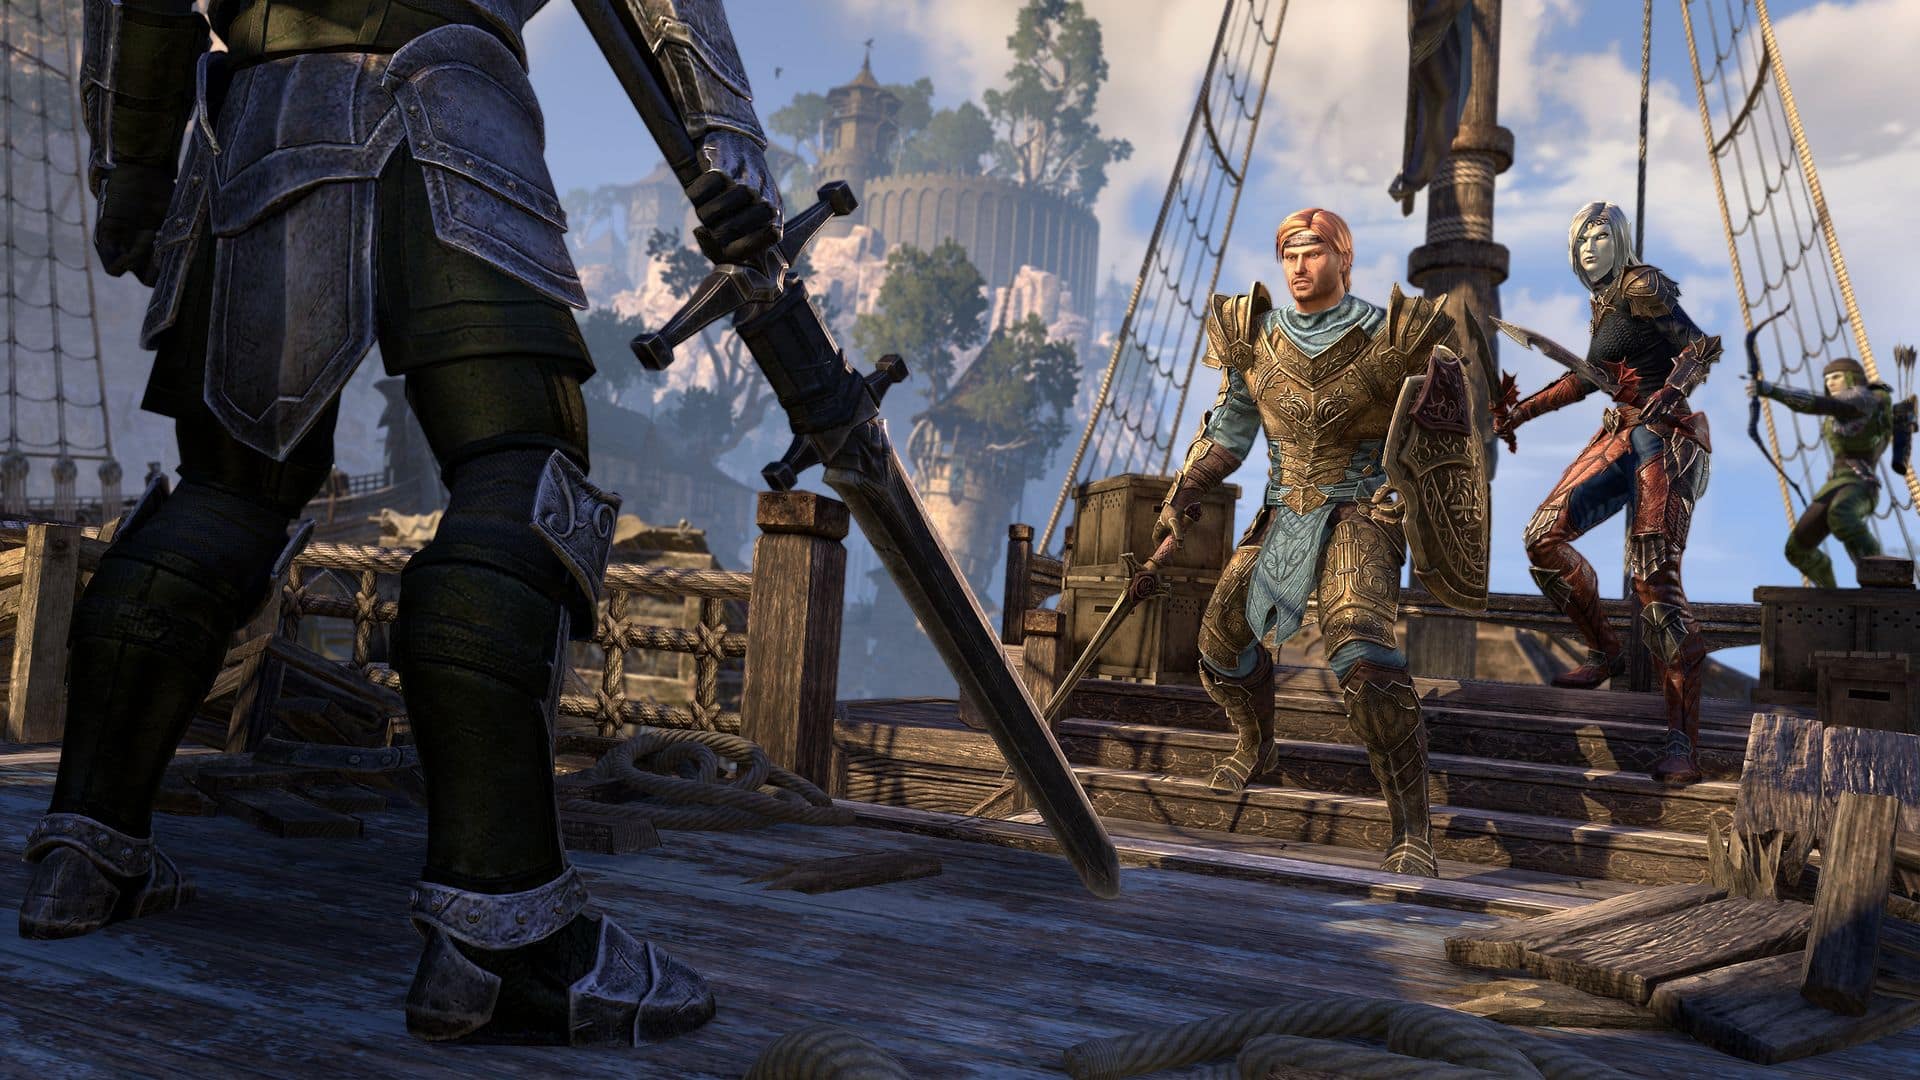 The Next Big Update for ESO Already Arriving (Firesong DLC)